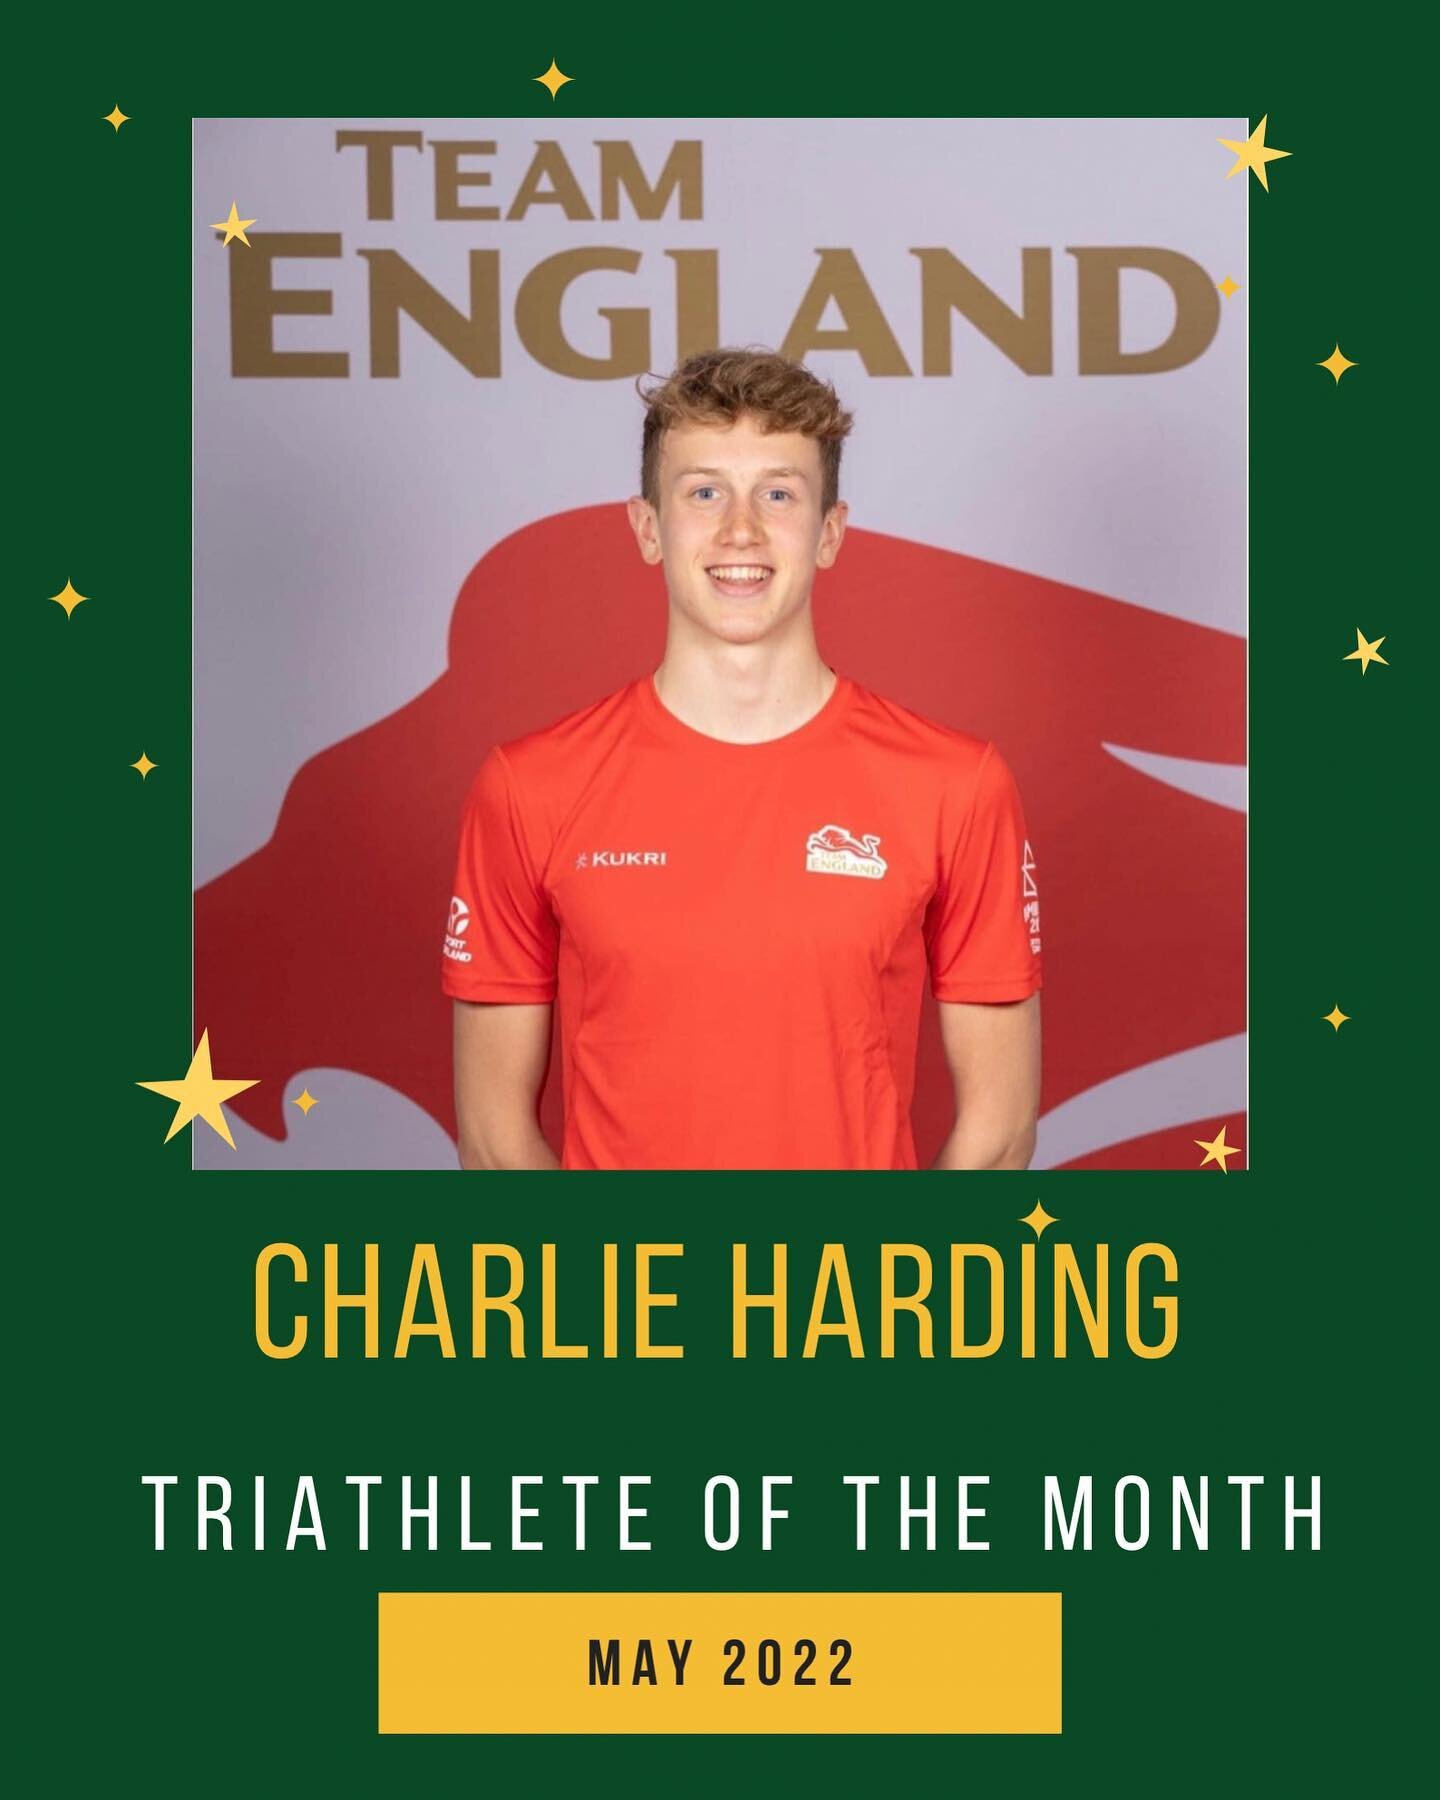 TRIATHLETE OF THE MONTH 
A huge congratulations to @charlie_harding17 for being selected to represent GB as a guide for @oscar_kelly.tri at THE COMMONWEALTH GAMES 2022! 
We all just want to say a huge well done to both of you and wish you the best of